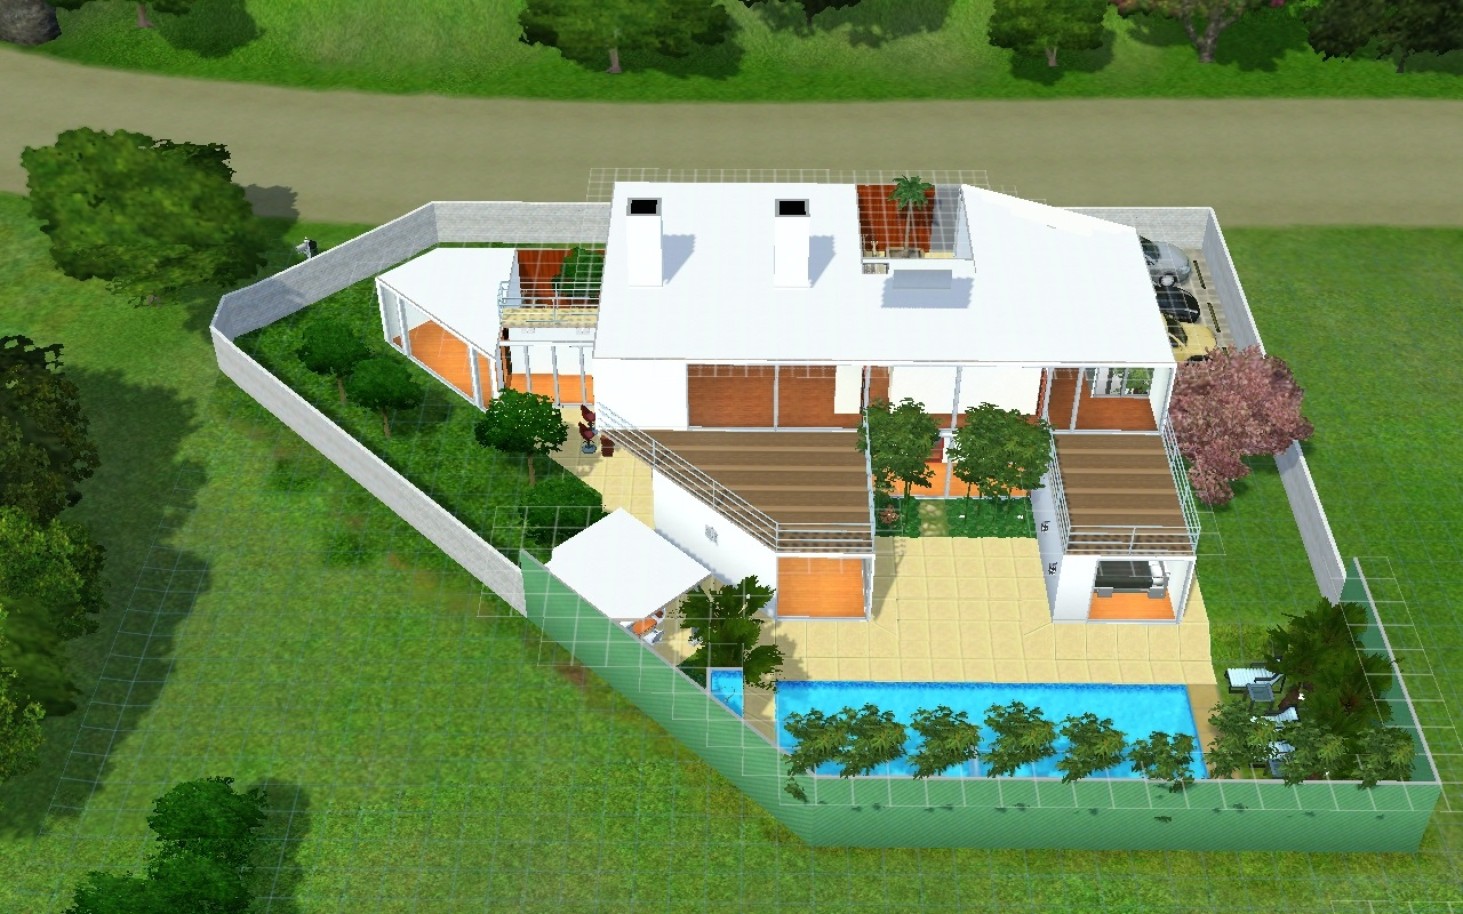 3 bedroom villa with pool and sea view, for sale in Guia, Algarve_244926